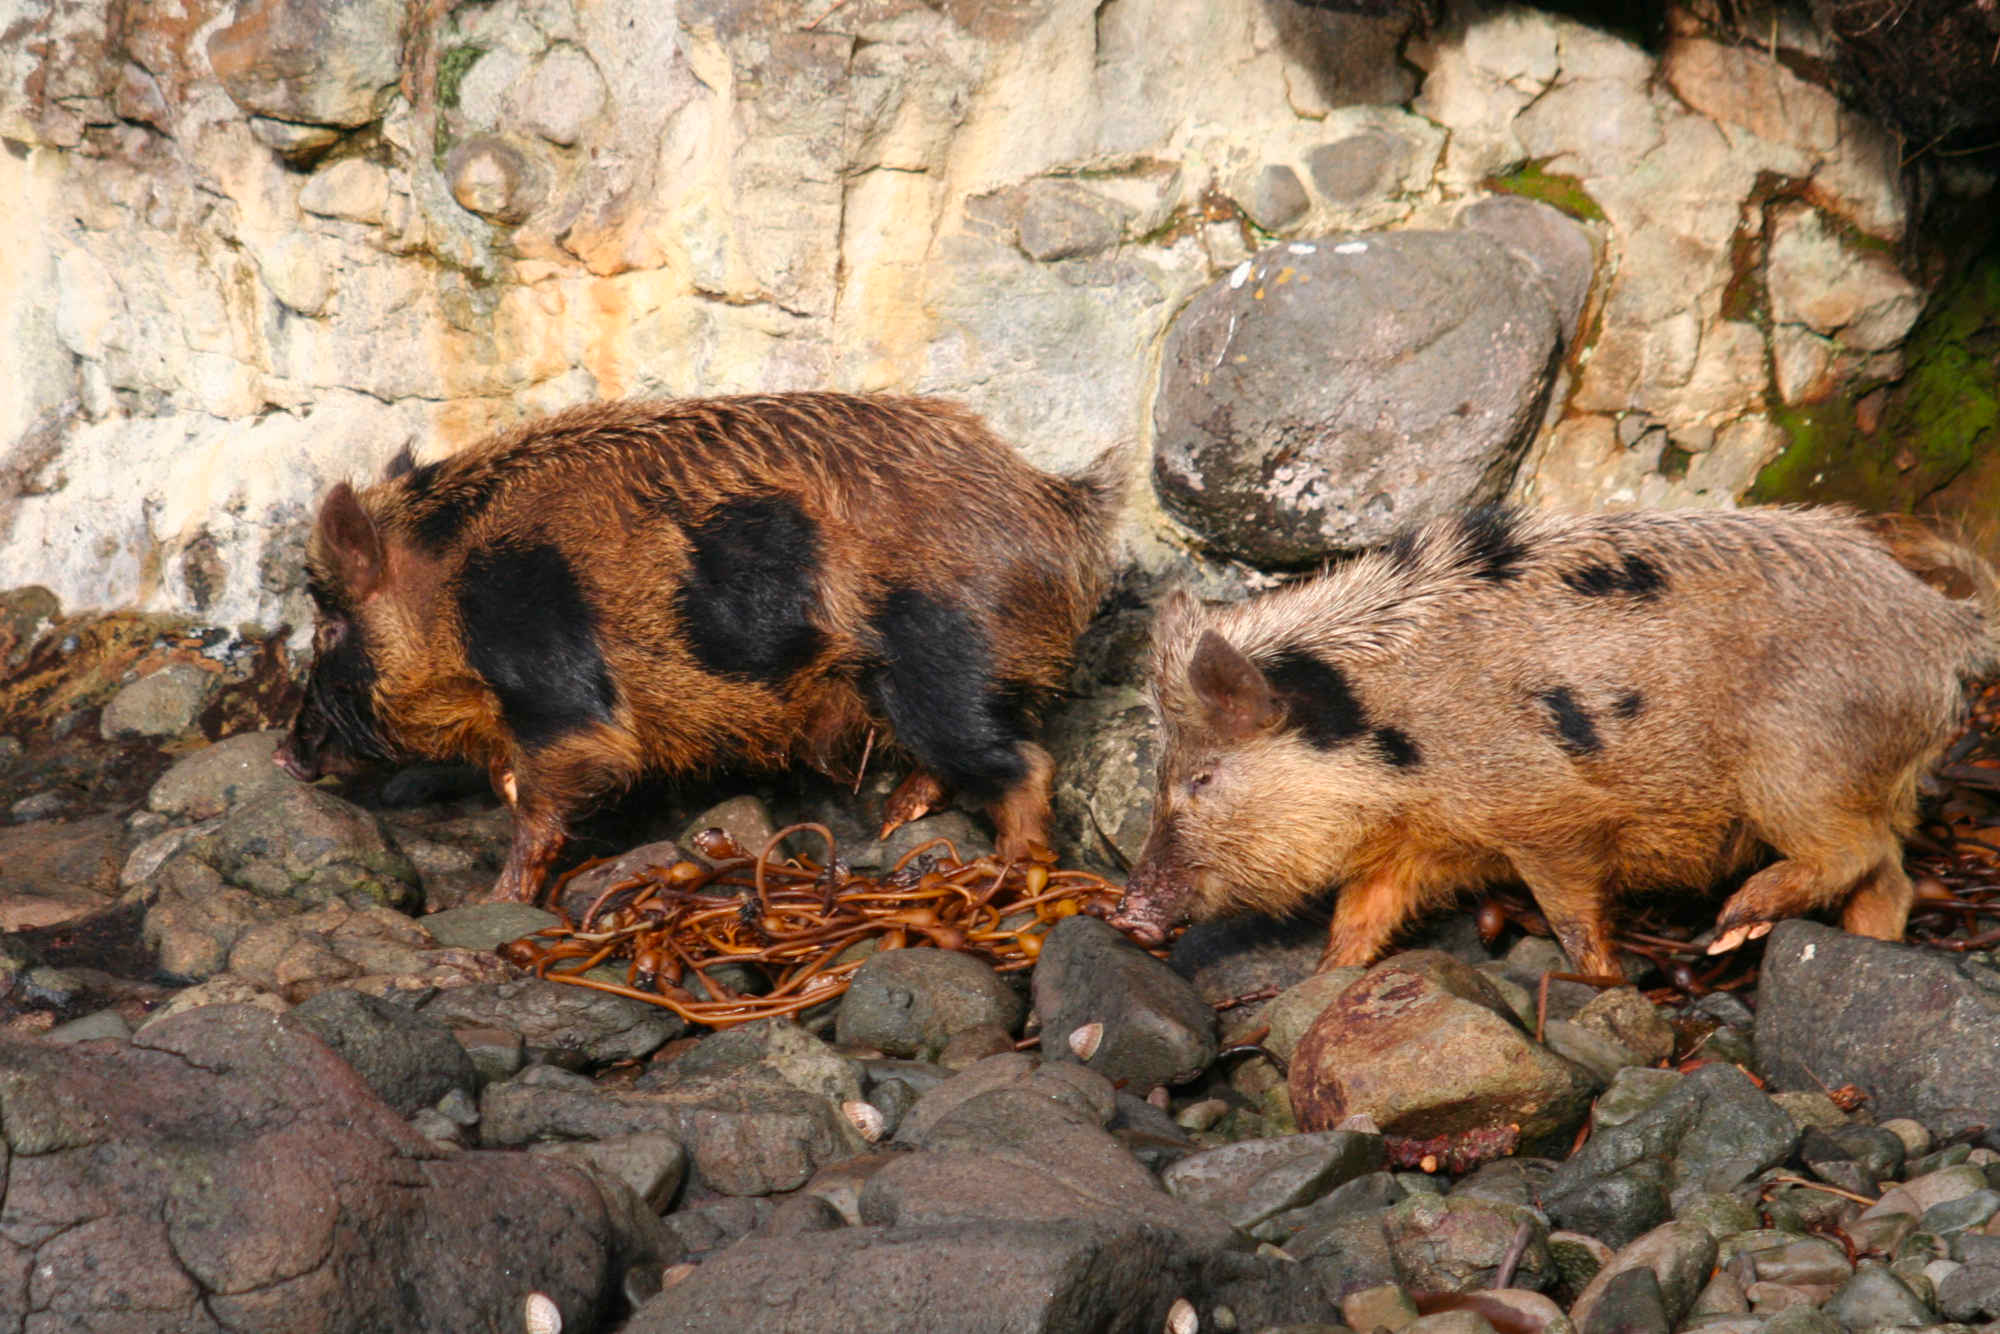 Auckland Island pigs scour the coastline for food. Due to their smaller stature compared to other breeds, the pigs are better candidates for xenotransplantation. 